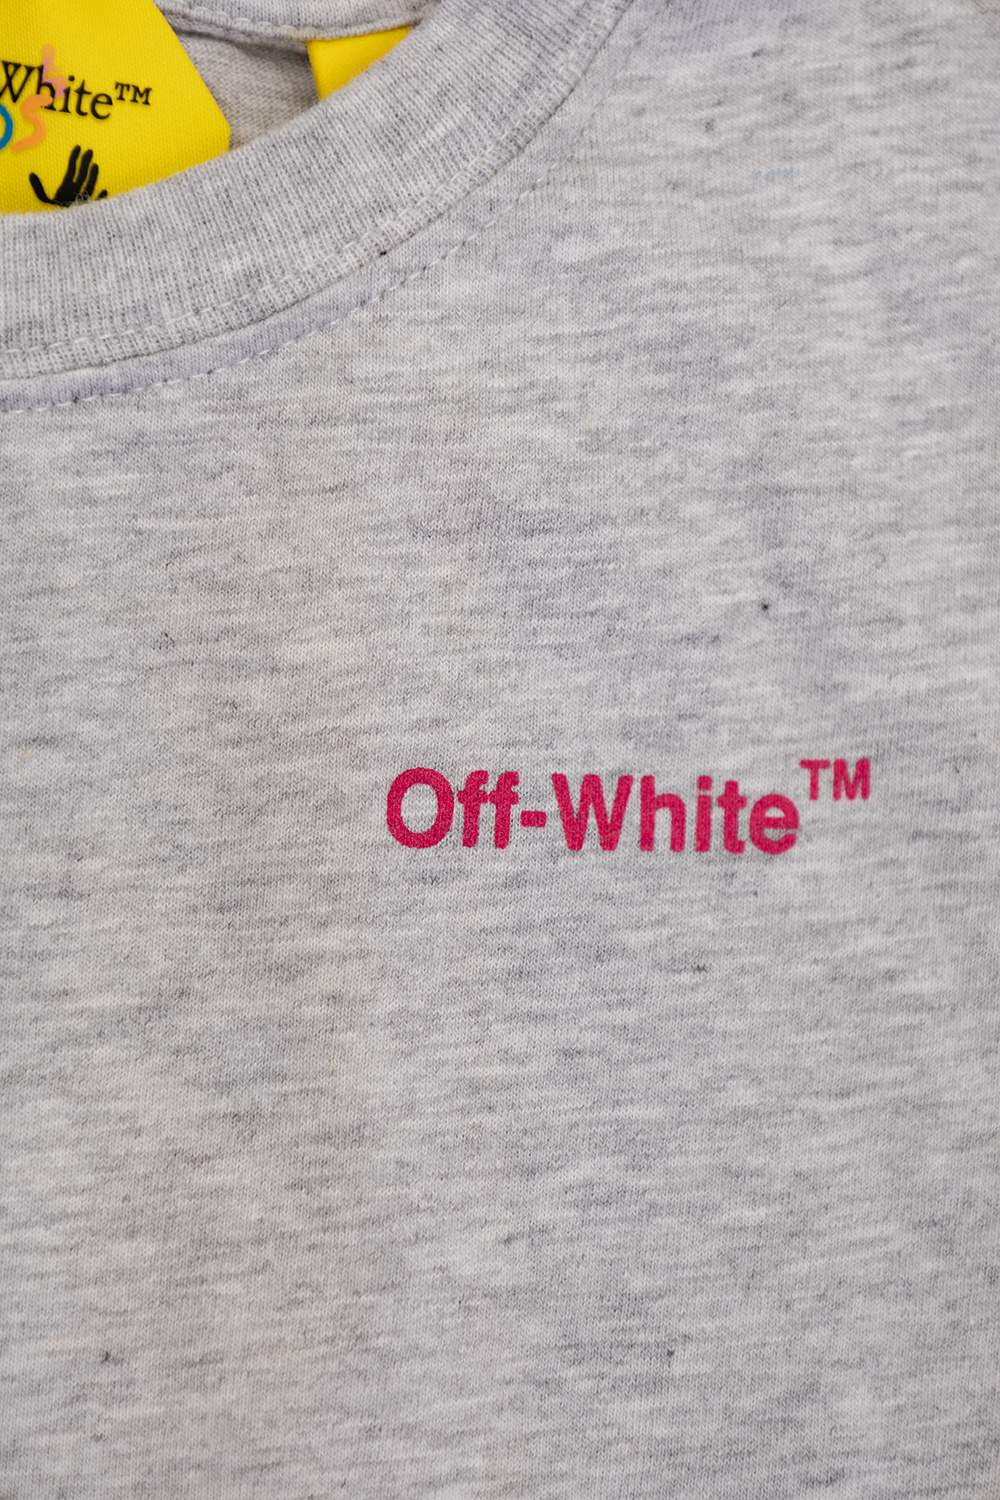 Off-White Kids This latest offering from the Oregon-based sportswear label is a pair of